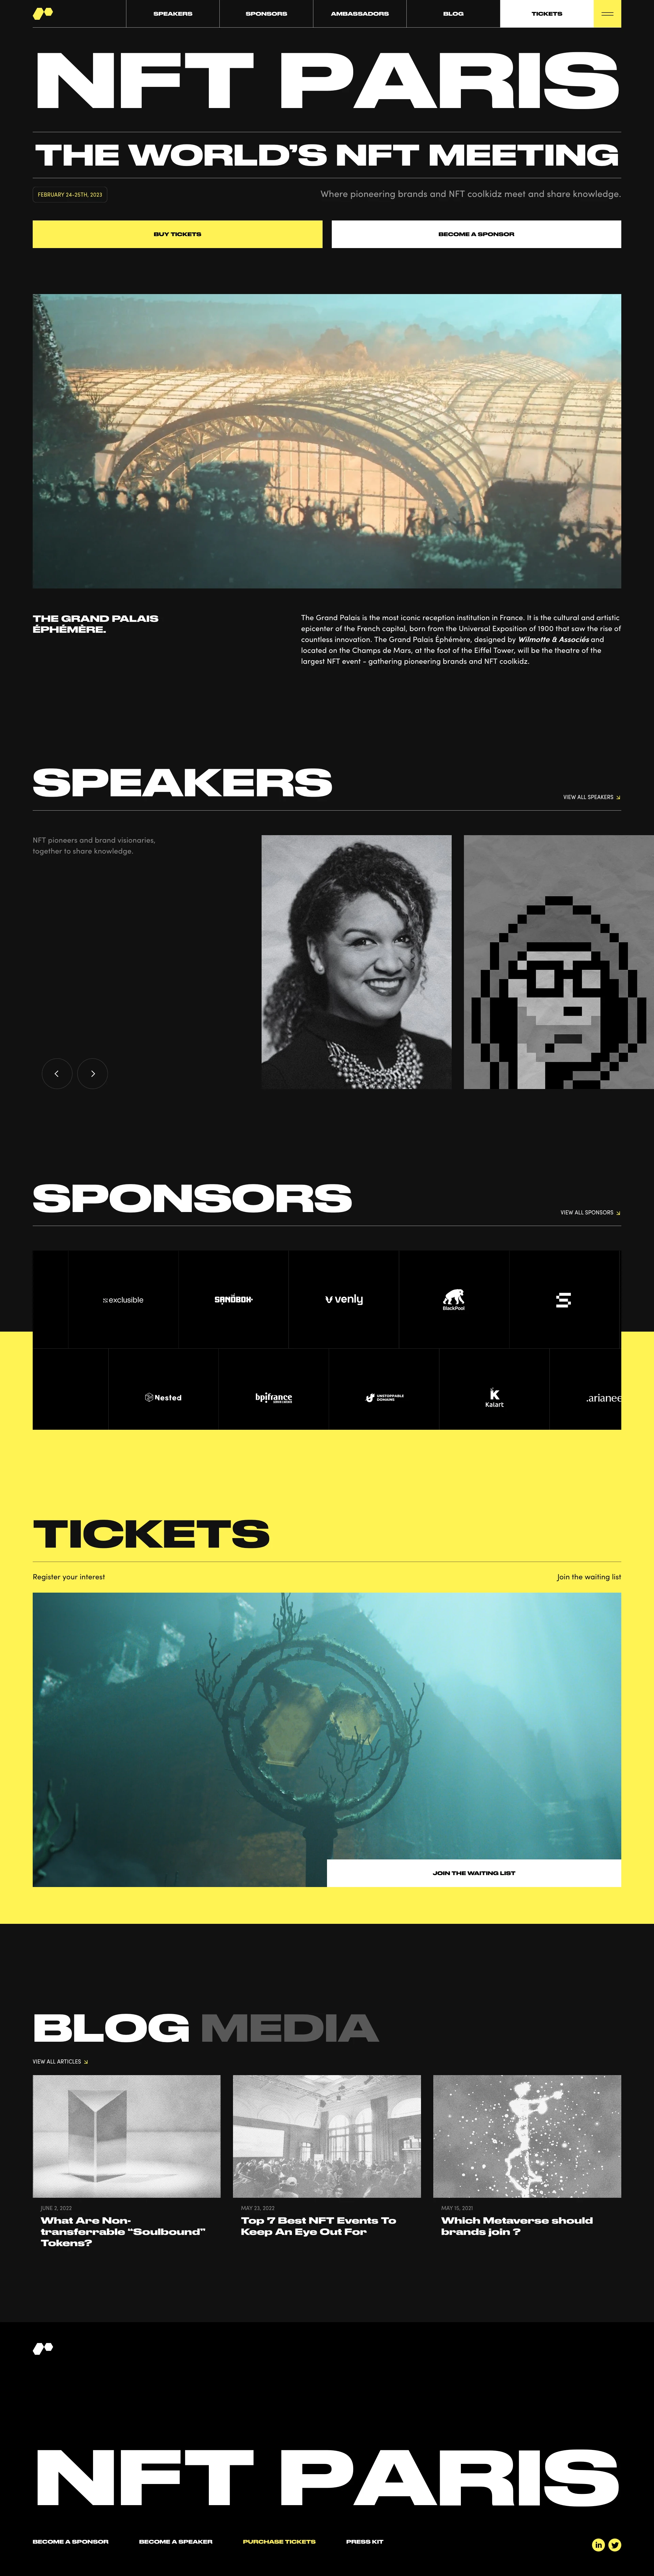 NFT Paris Landing Page Example: NFT Paris is the biggest annual NFT conference, bringing together Brands, Artists, Entrepreneurs, Investors and Collectors interested in Non fungible tokens